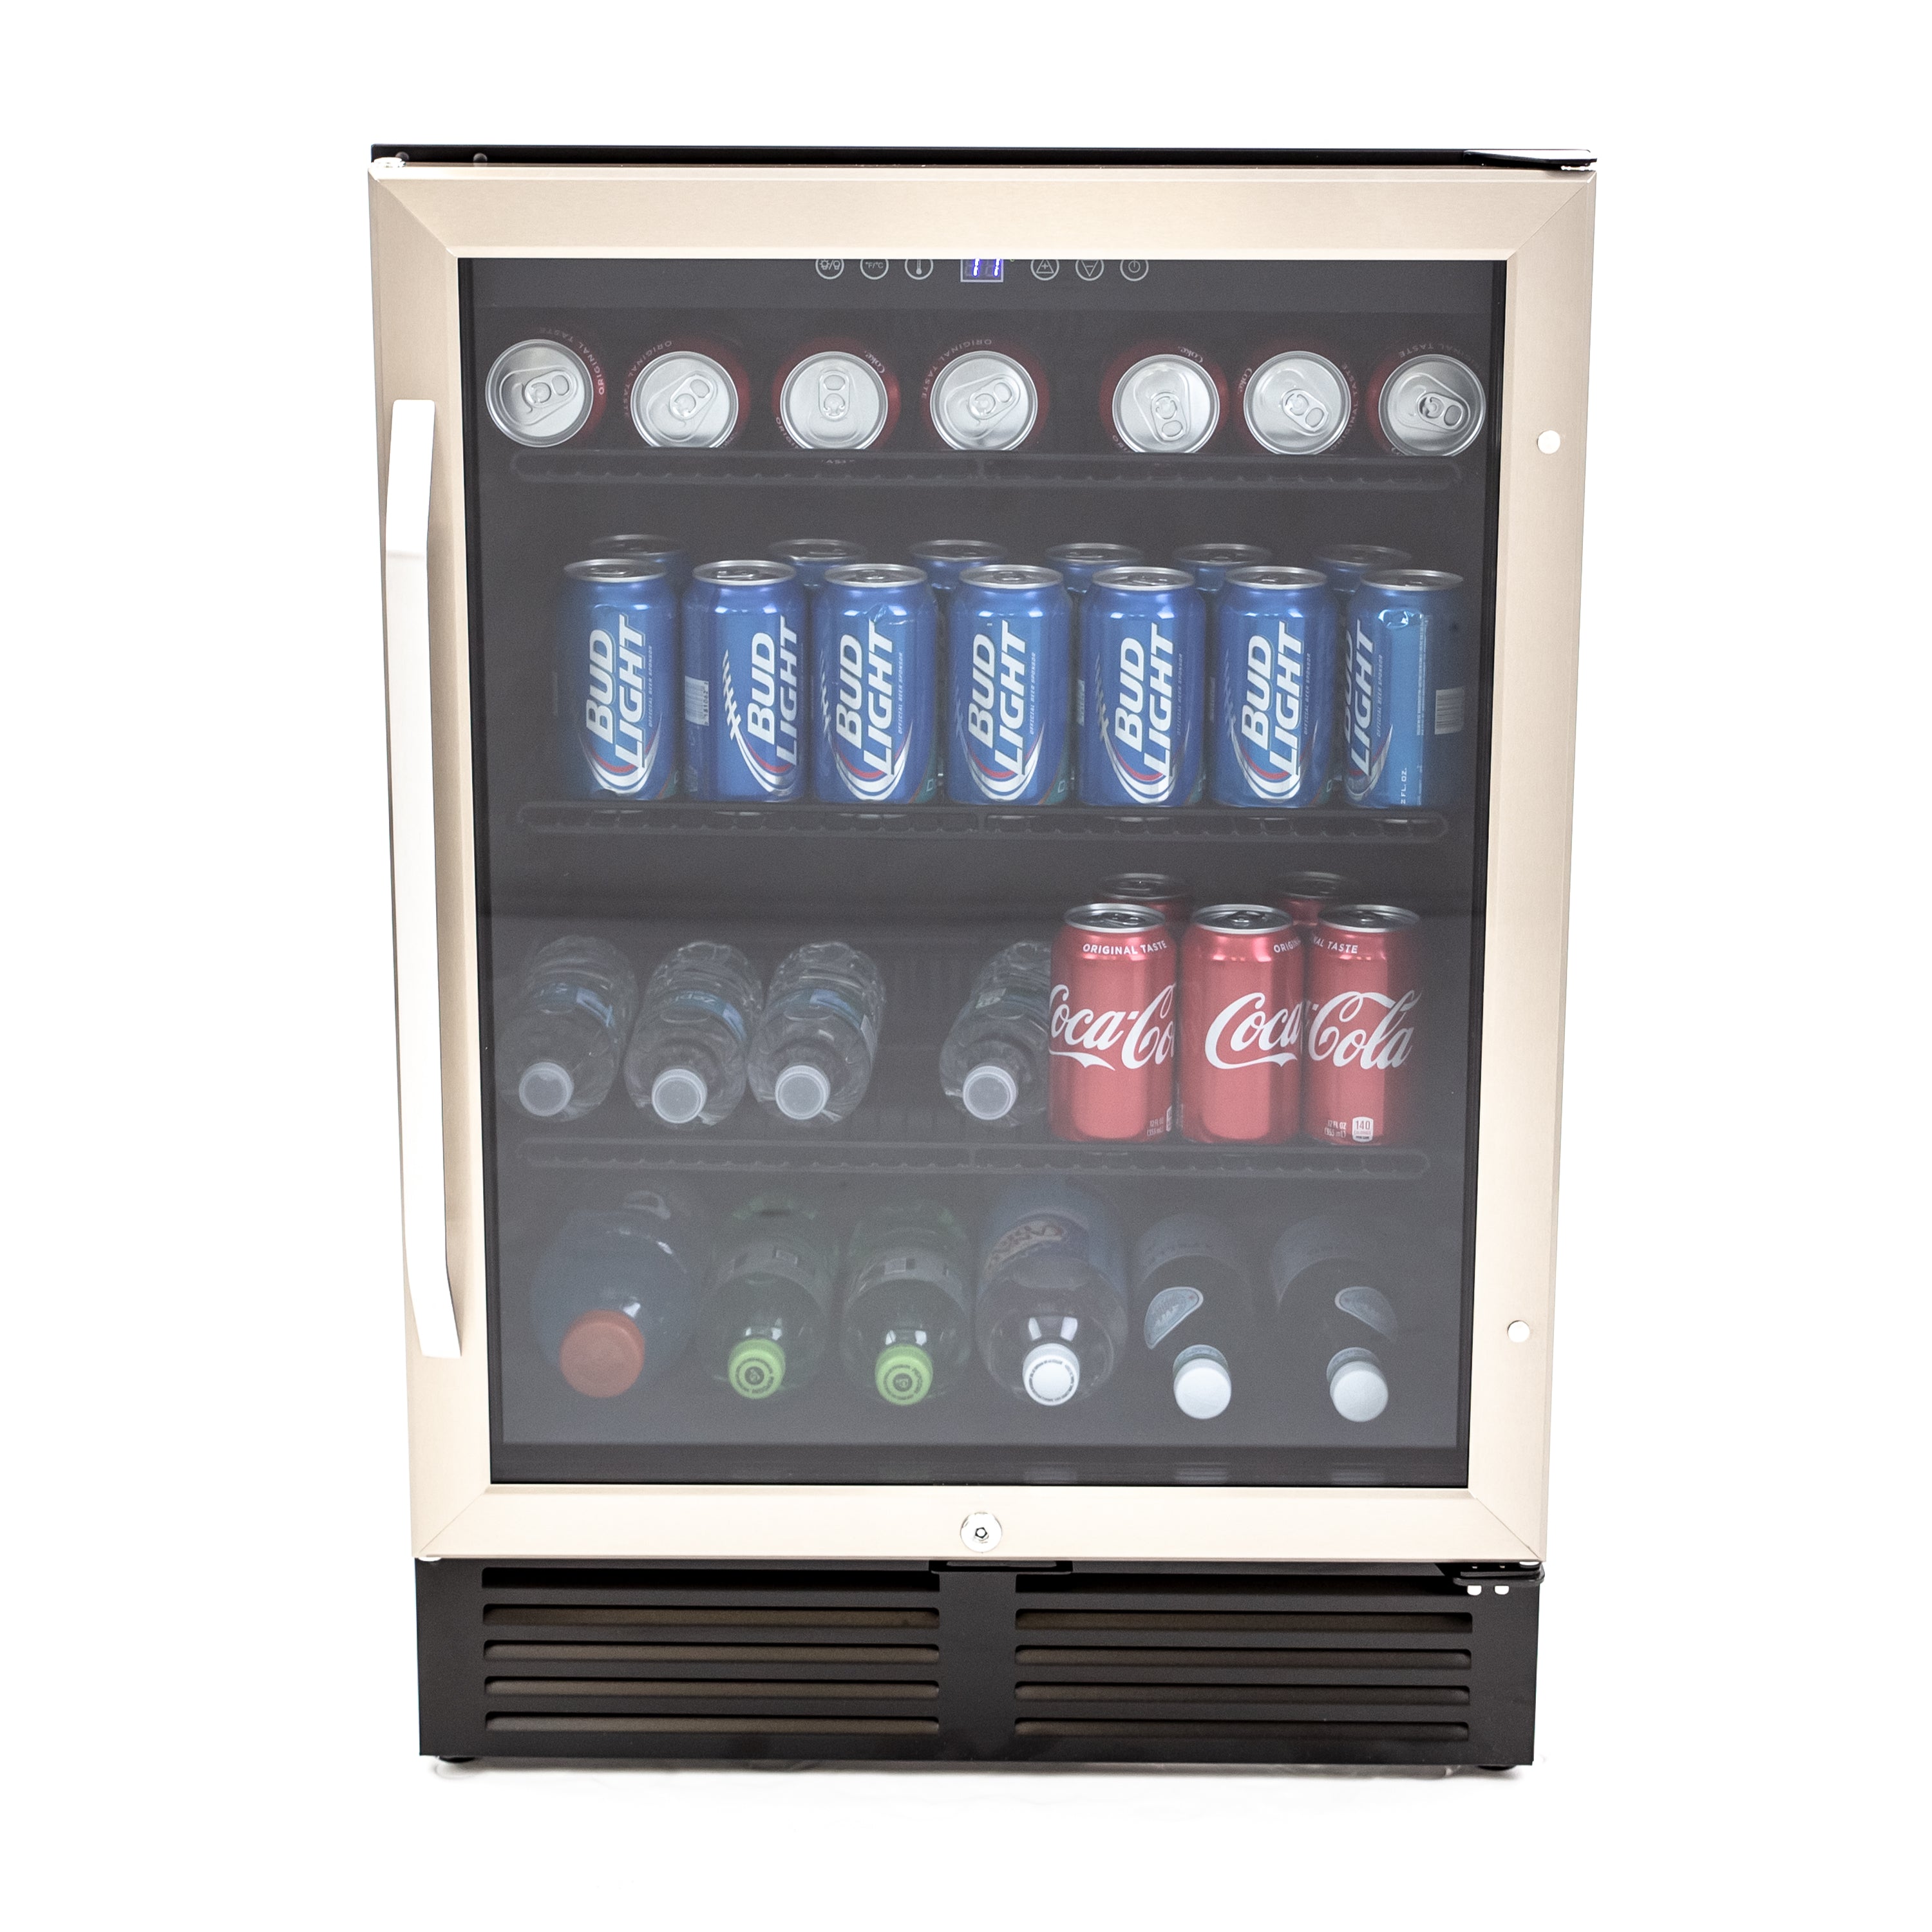 Avanti - BCA516SS, Beverage Center, 130 Can Capacity, in Stainless Steel with Black Cabinet